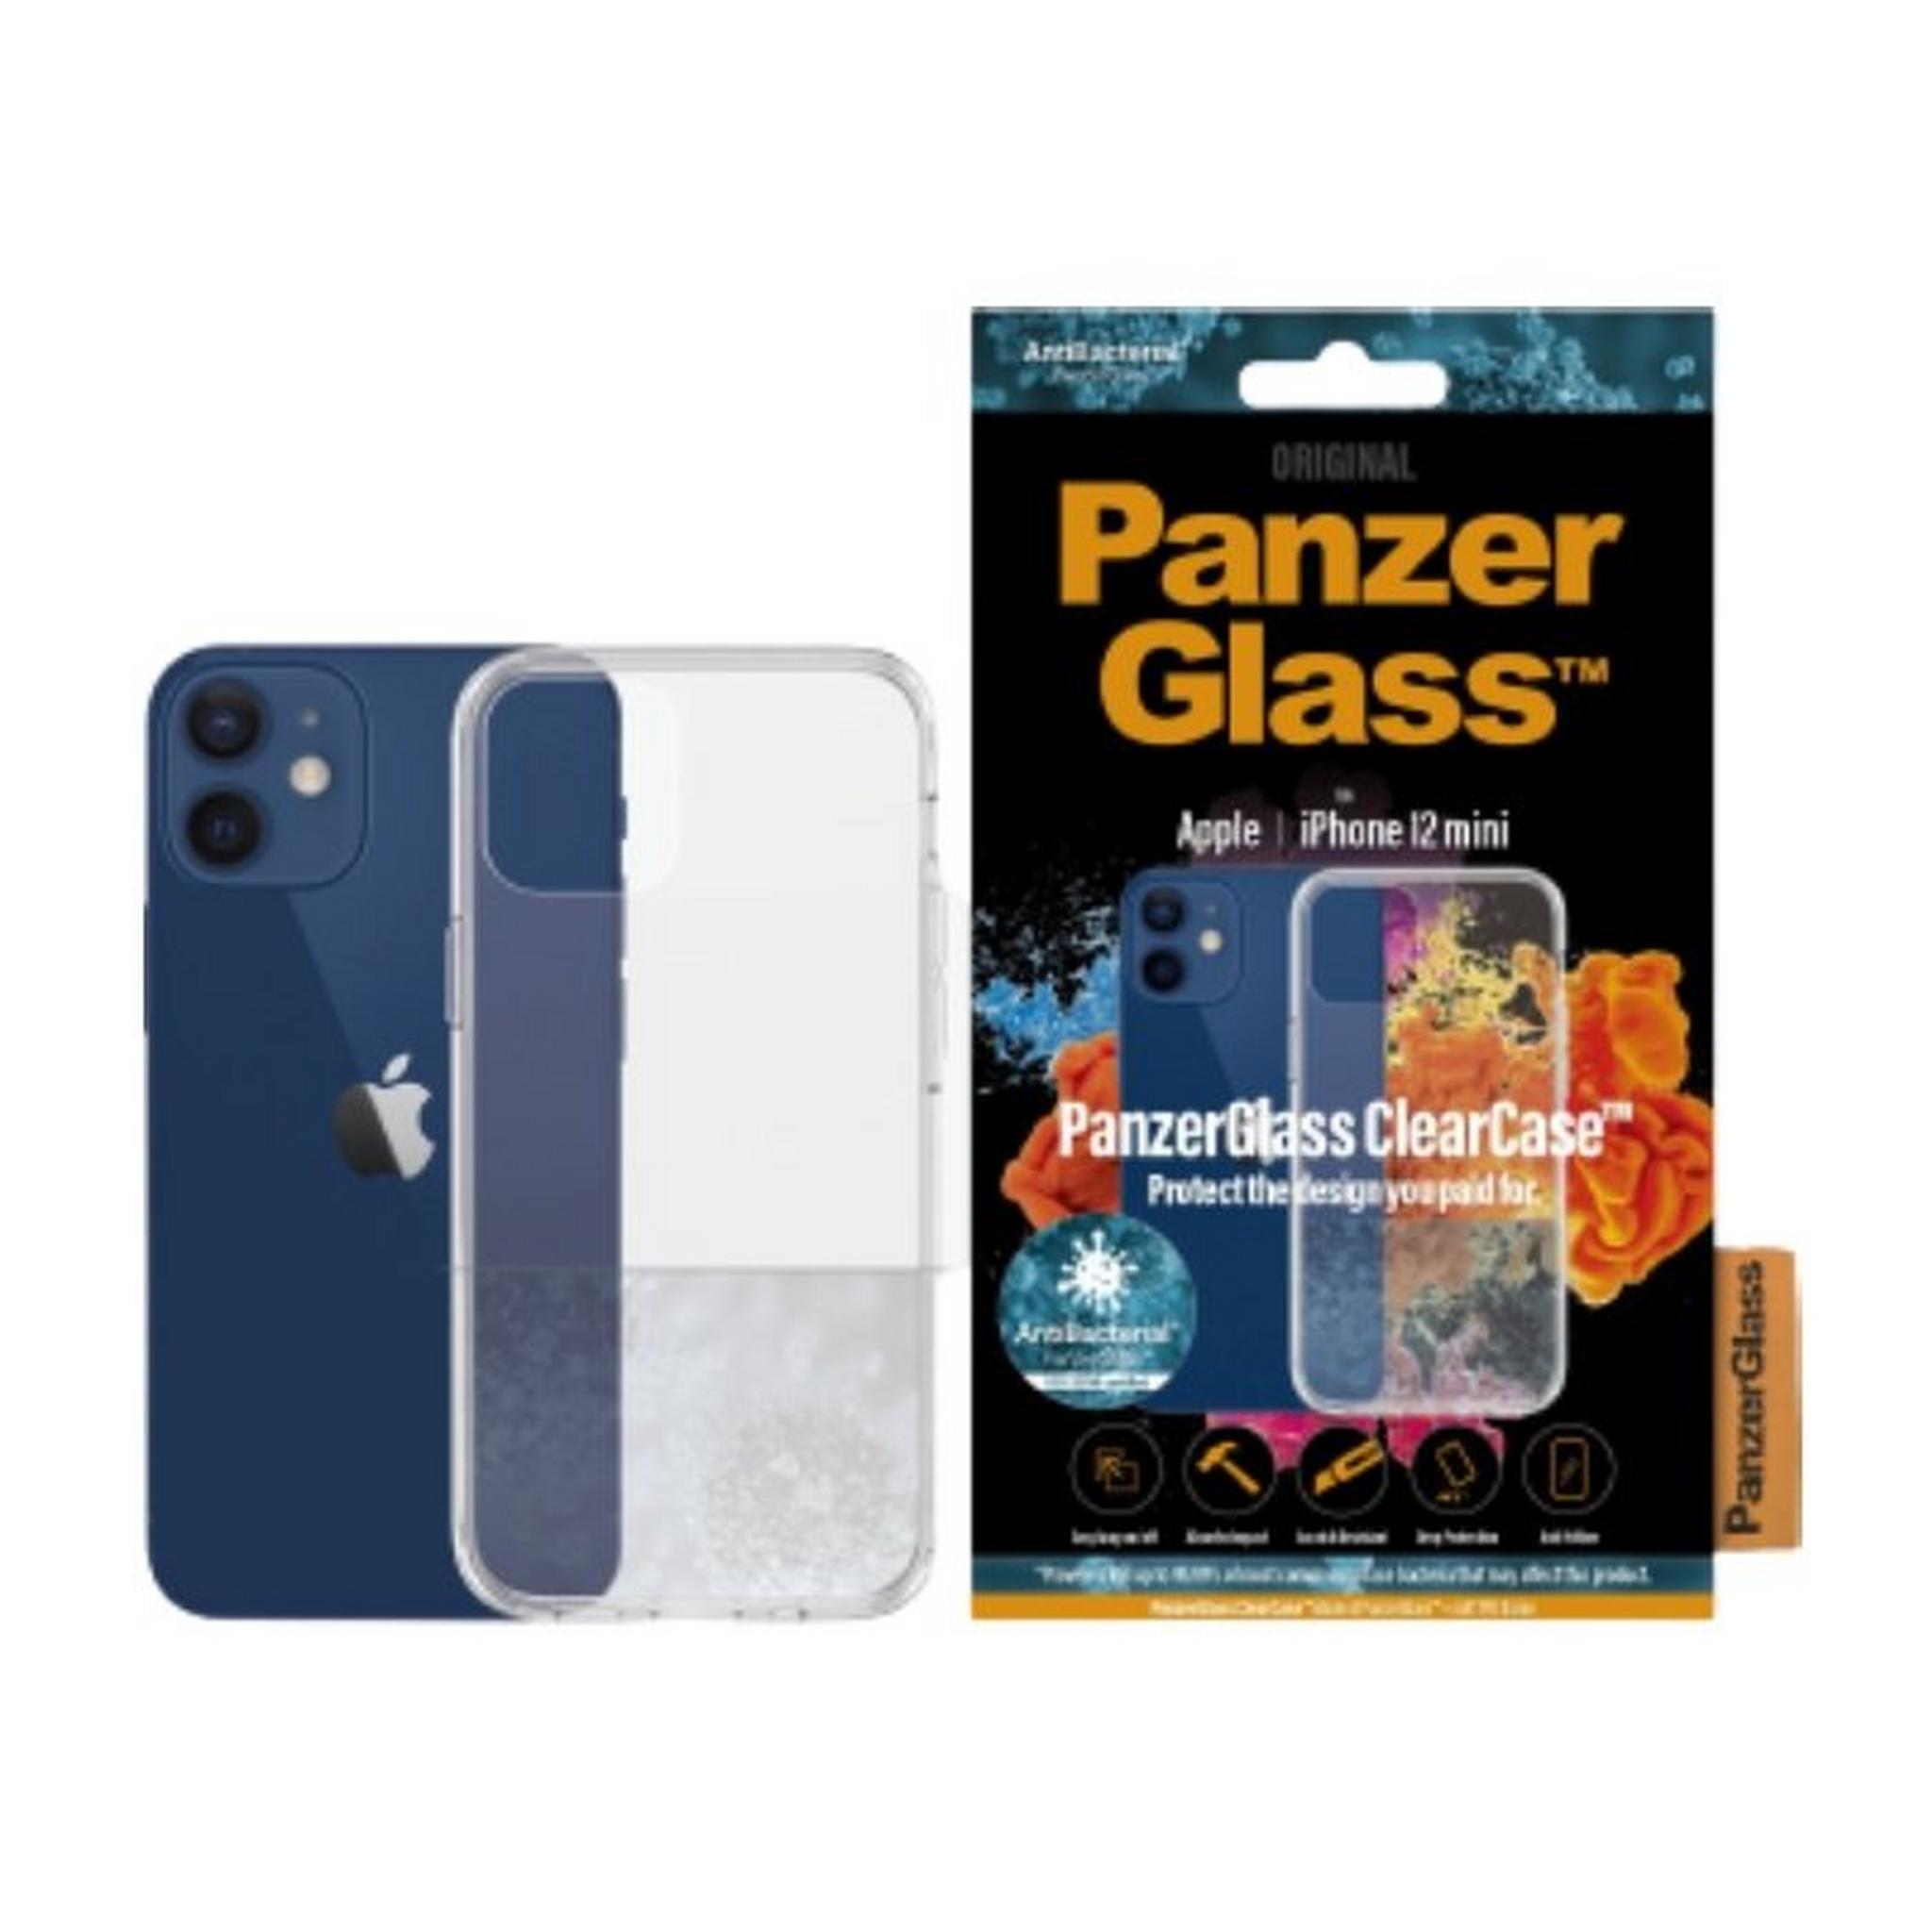 PanzerGlass ClearCase For iPhone 12 Mini